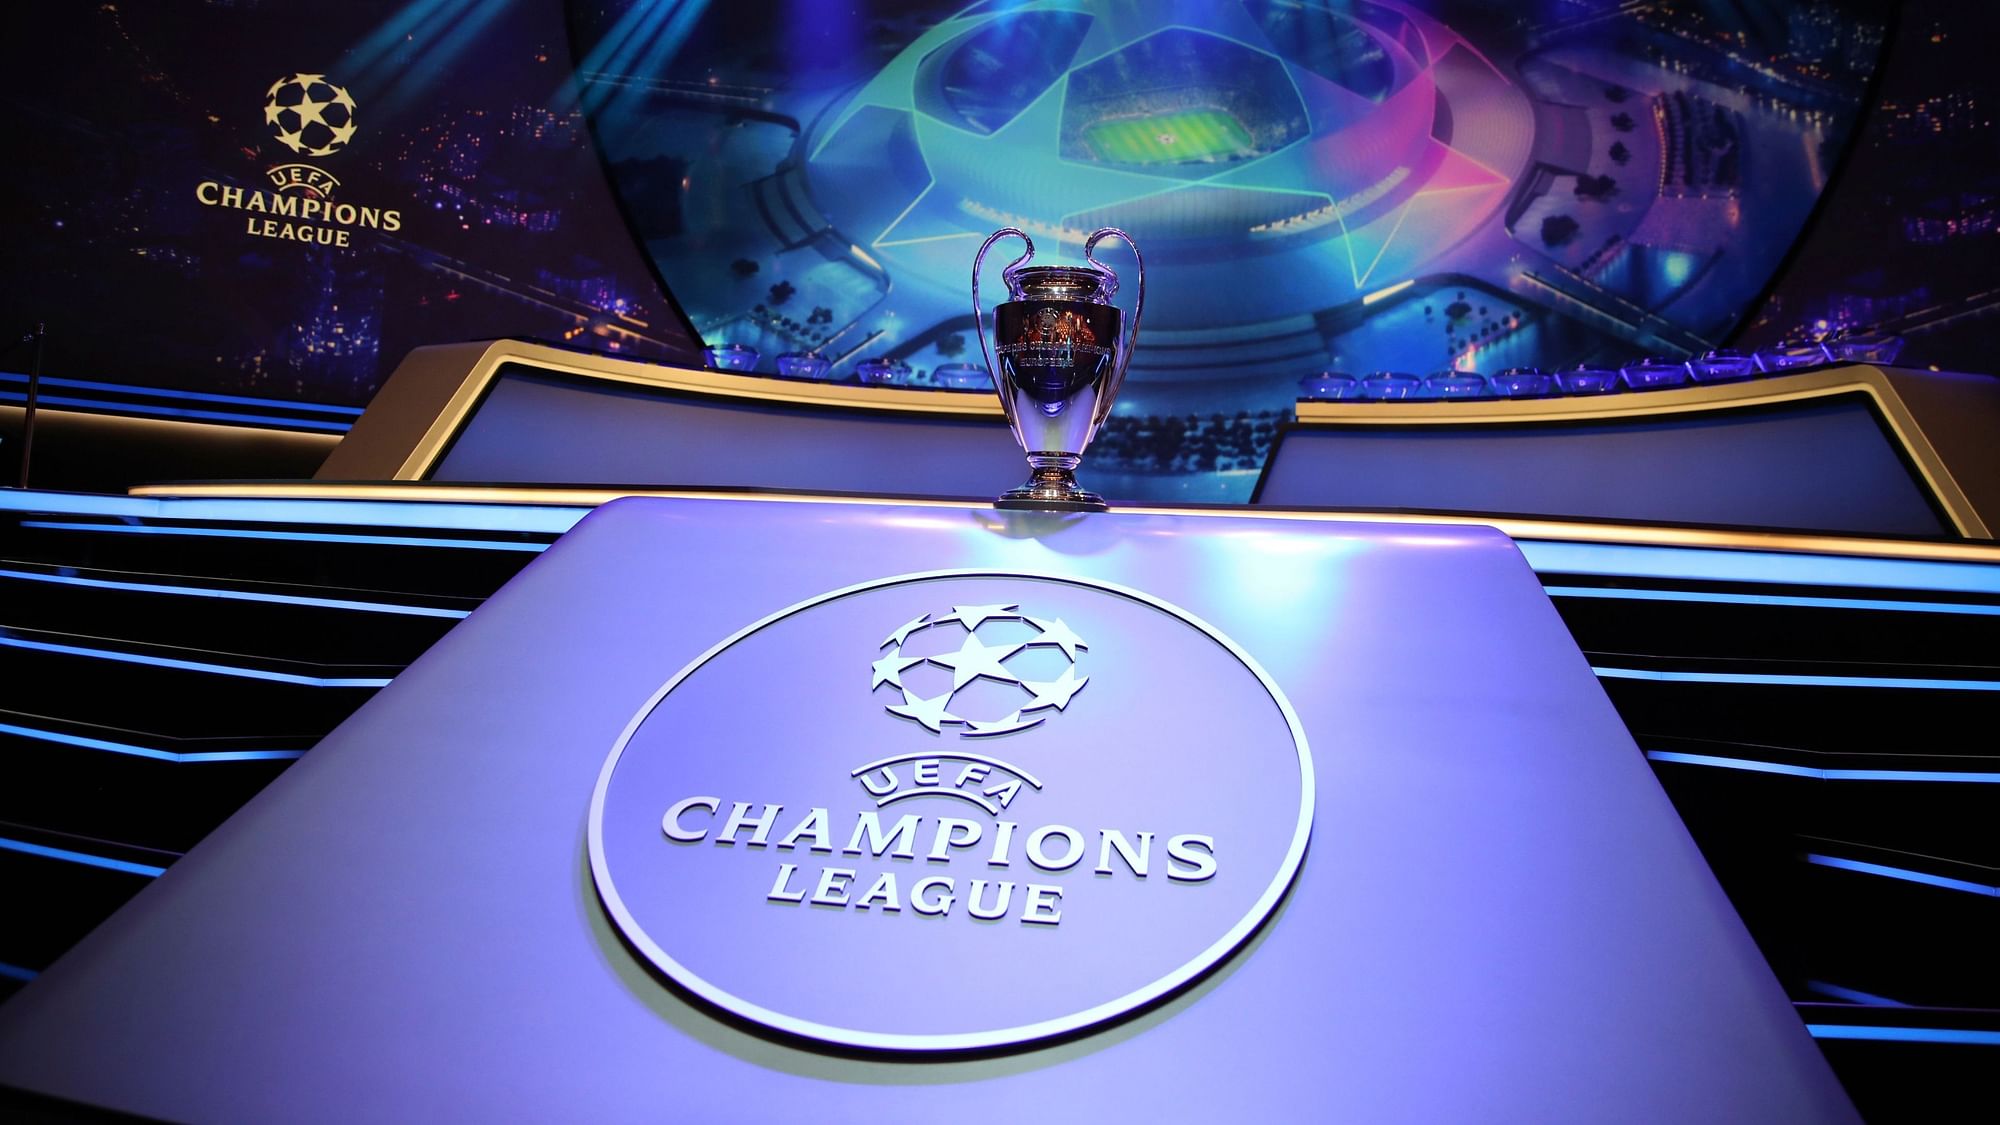 LIV vs NAP, BAR vs DOR, CHE vs VAL Live Streaming Online: The 2019-20 season of the UEFA Champions League gets underway from Tuesday, 17 September.